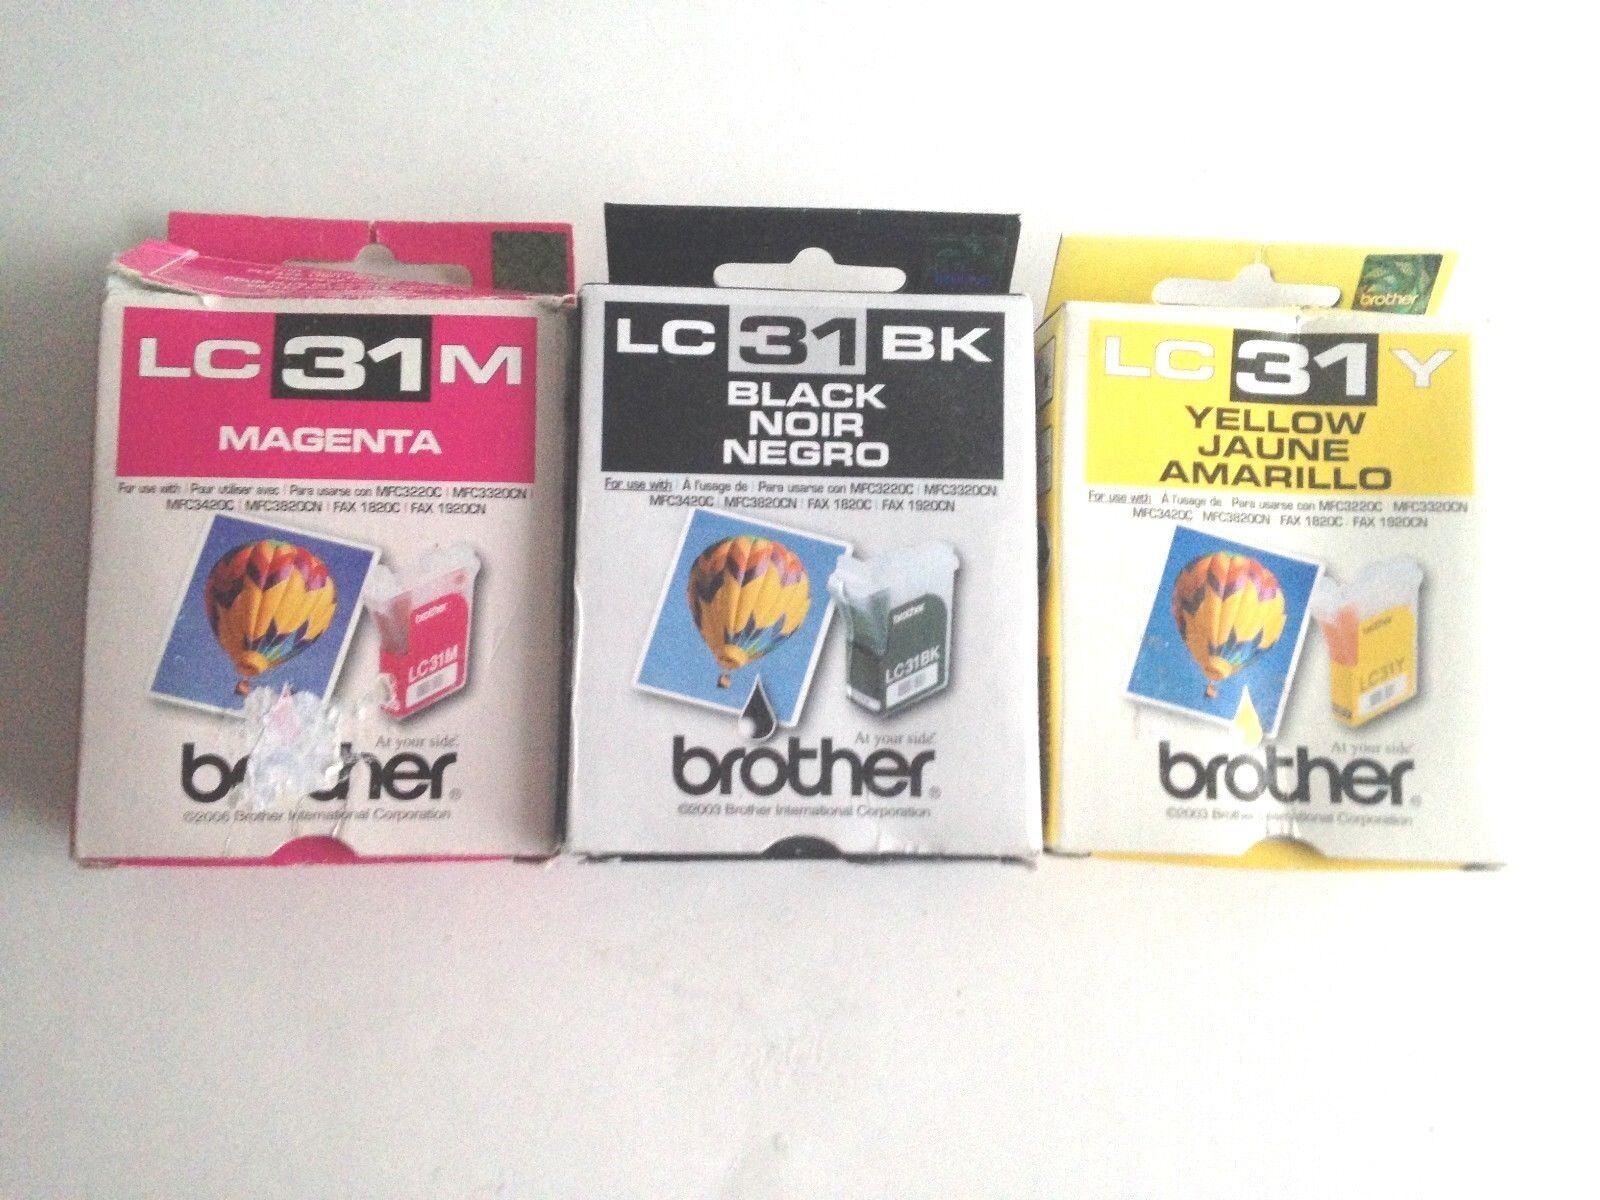 Genuine Brother LC-31 Ink Cartridges (3) Black Magenta Yellow Expired 2009